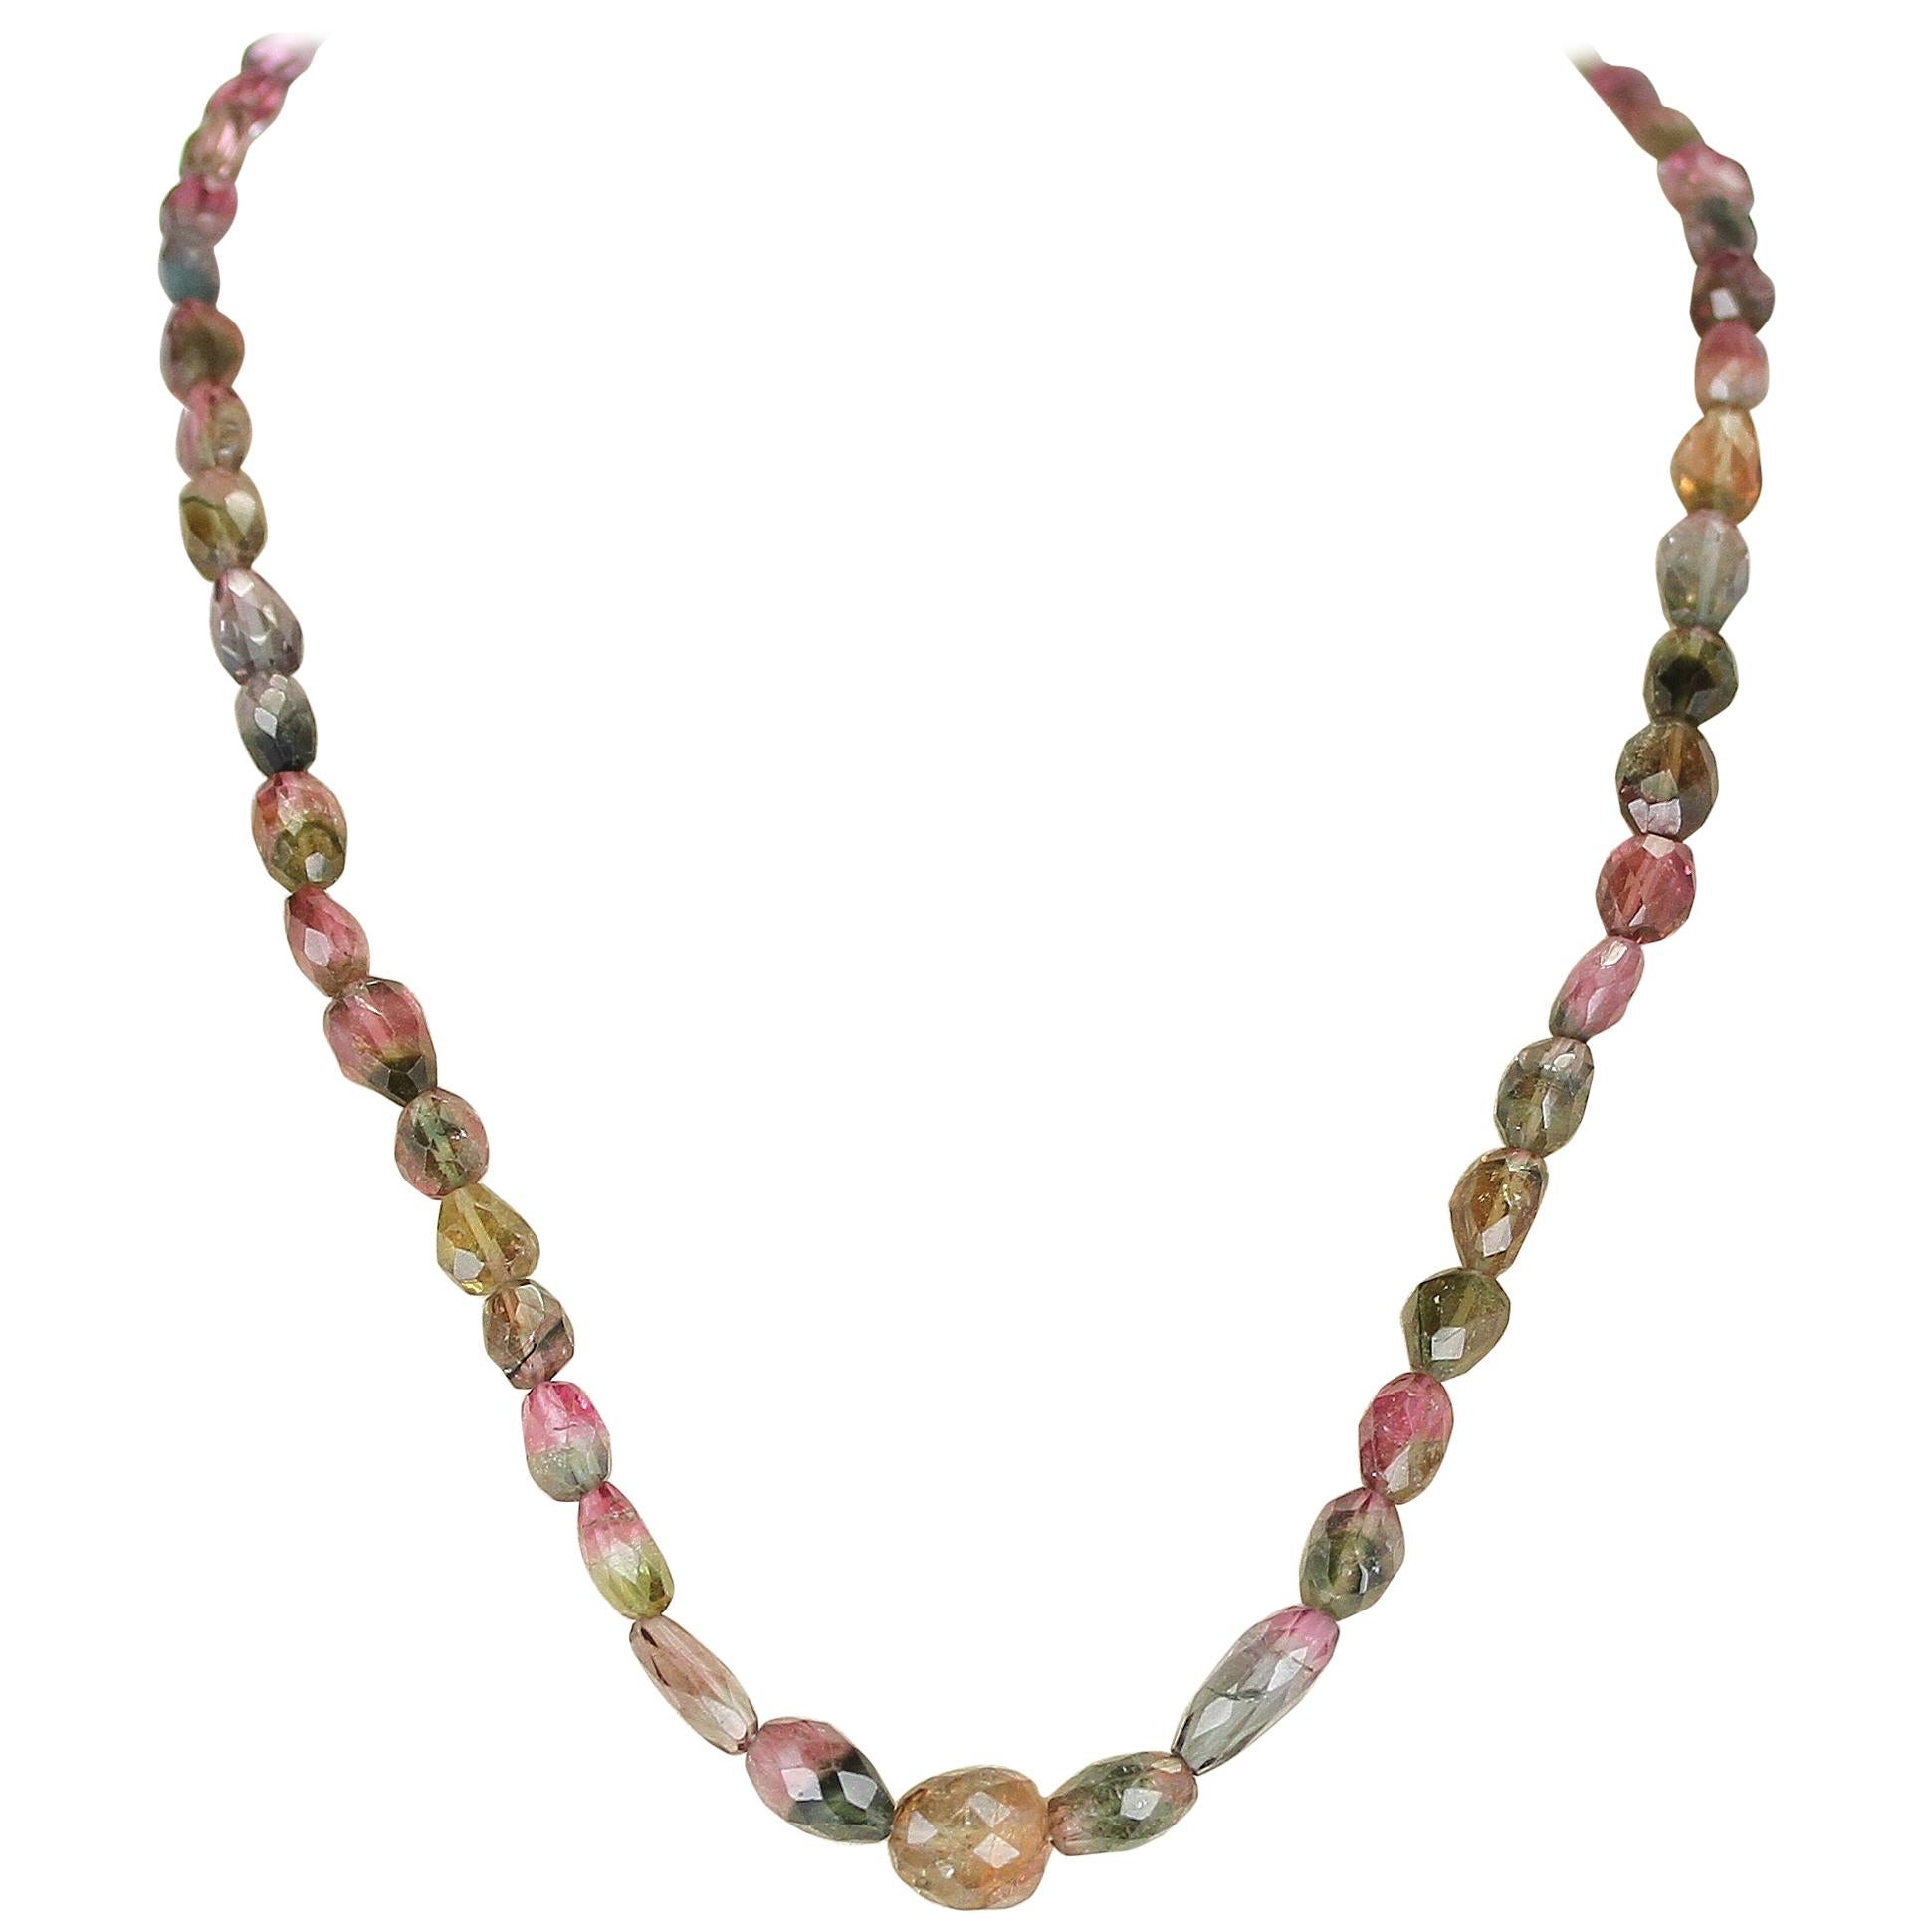 Genuine and Natural Watermelon Tourmaline Tumbled Faceted Beads Necklace For Sale